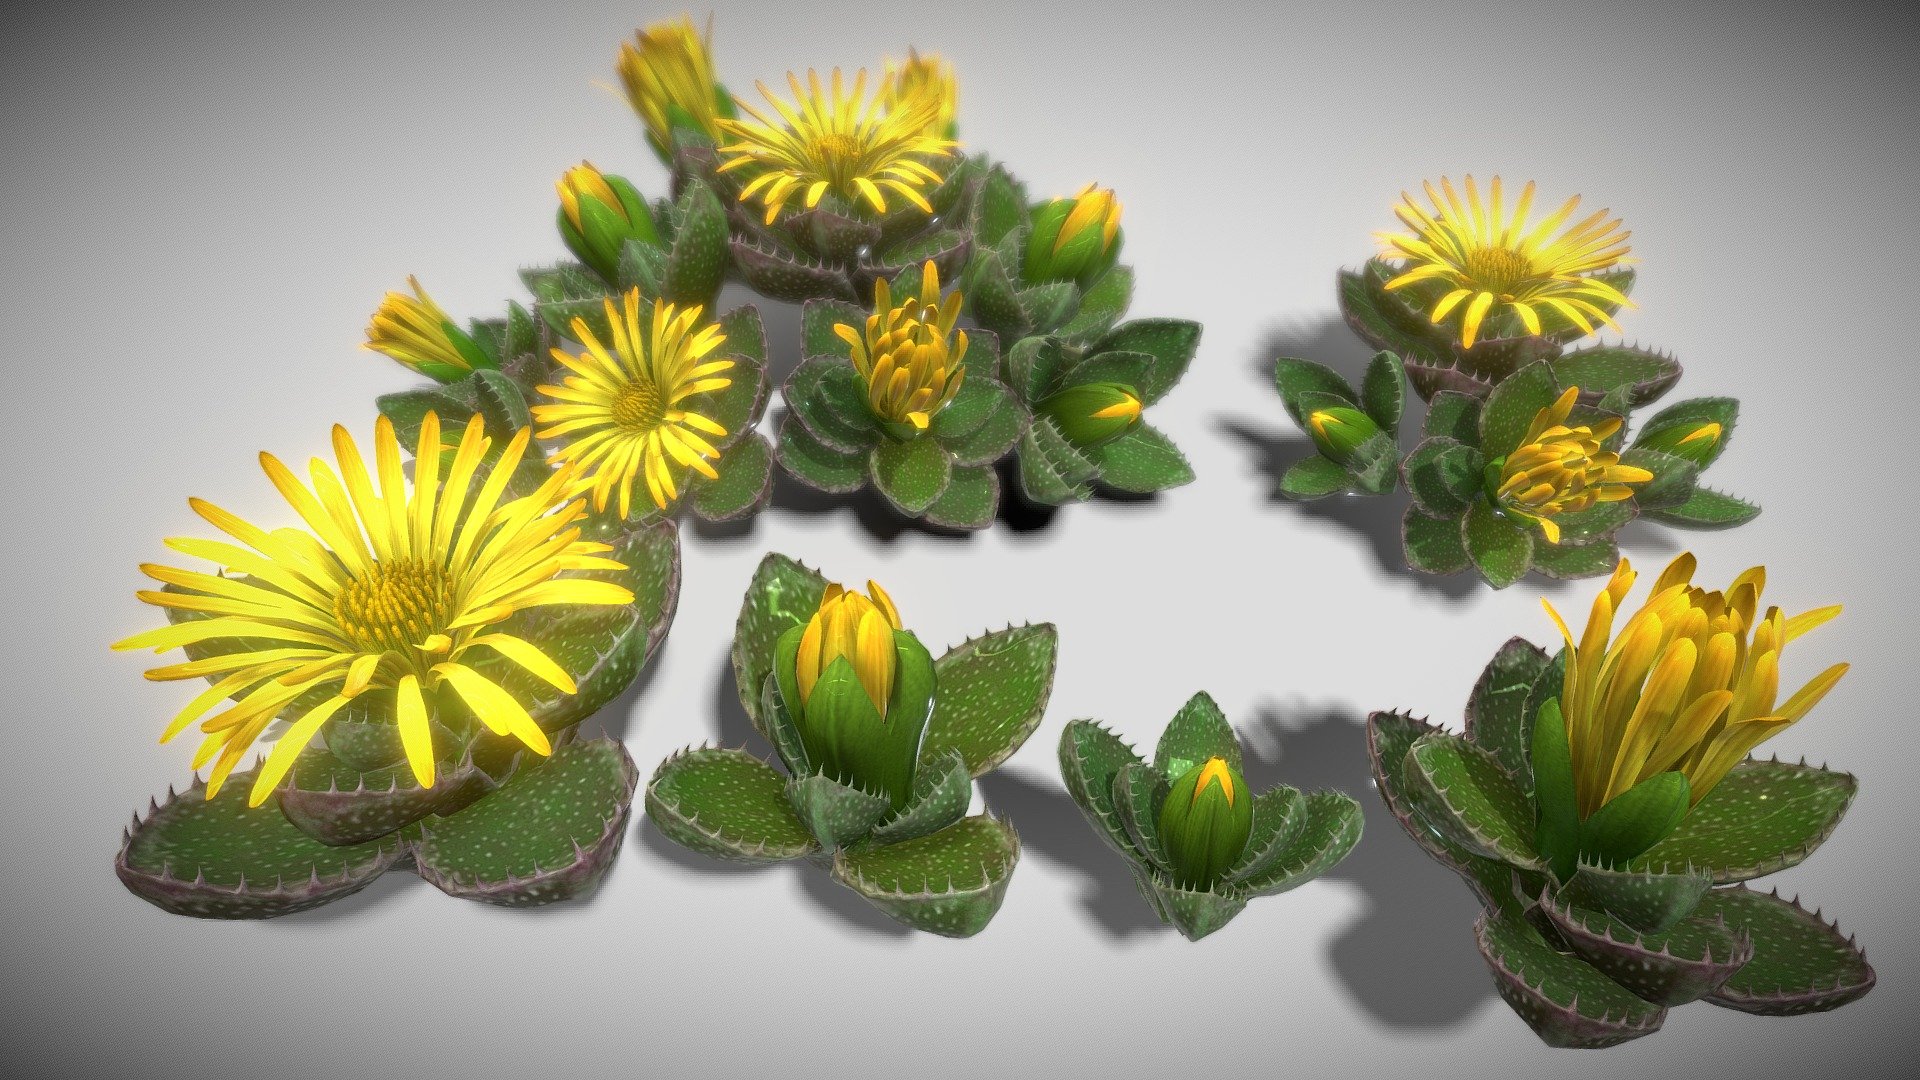 HIGH QUALITY Flower optimized for Unity game engine!
Mobile Optimize Scene This is model 3D Flower Faucaria Tigrina in the Big Pack (Cartoon Flower Colections) with over 5 types color!
All objects are ready to use in your visualizations.
-1024x1024, texture maps
- Poly Count : Average 209729  polys /199022 tris - Flower Faucaria Tigrina - Buy Royalty Free 3D model by vustudios 3d model